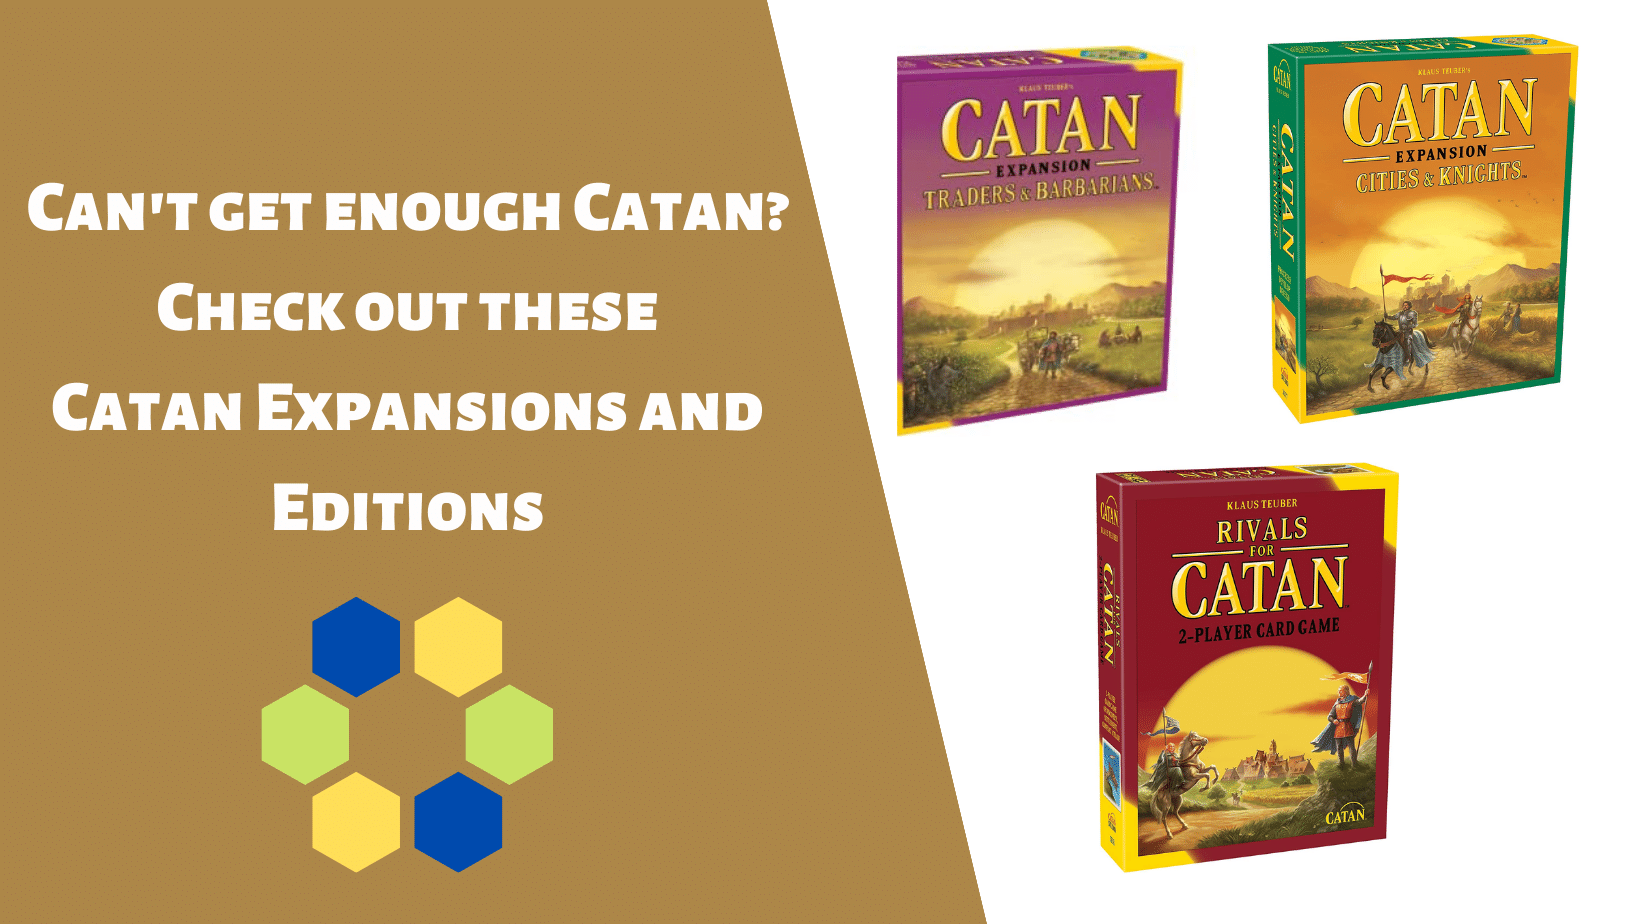 Can’t get enough Catan? Check out these Catan Expansions and Editions.